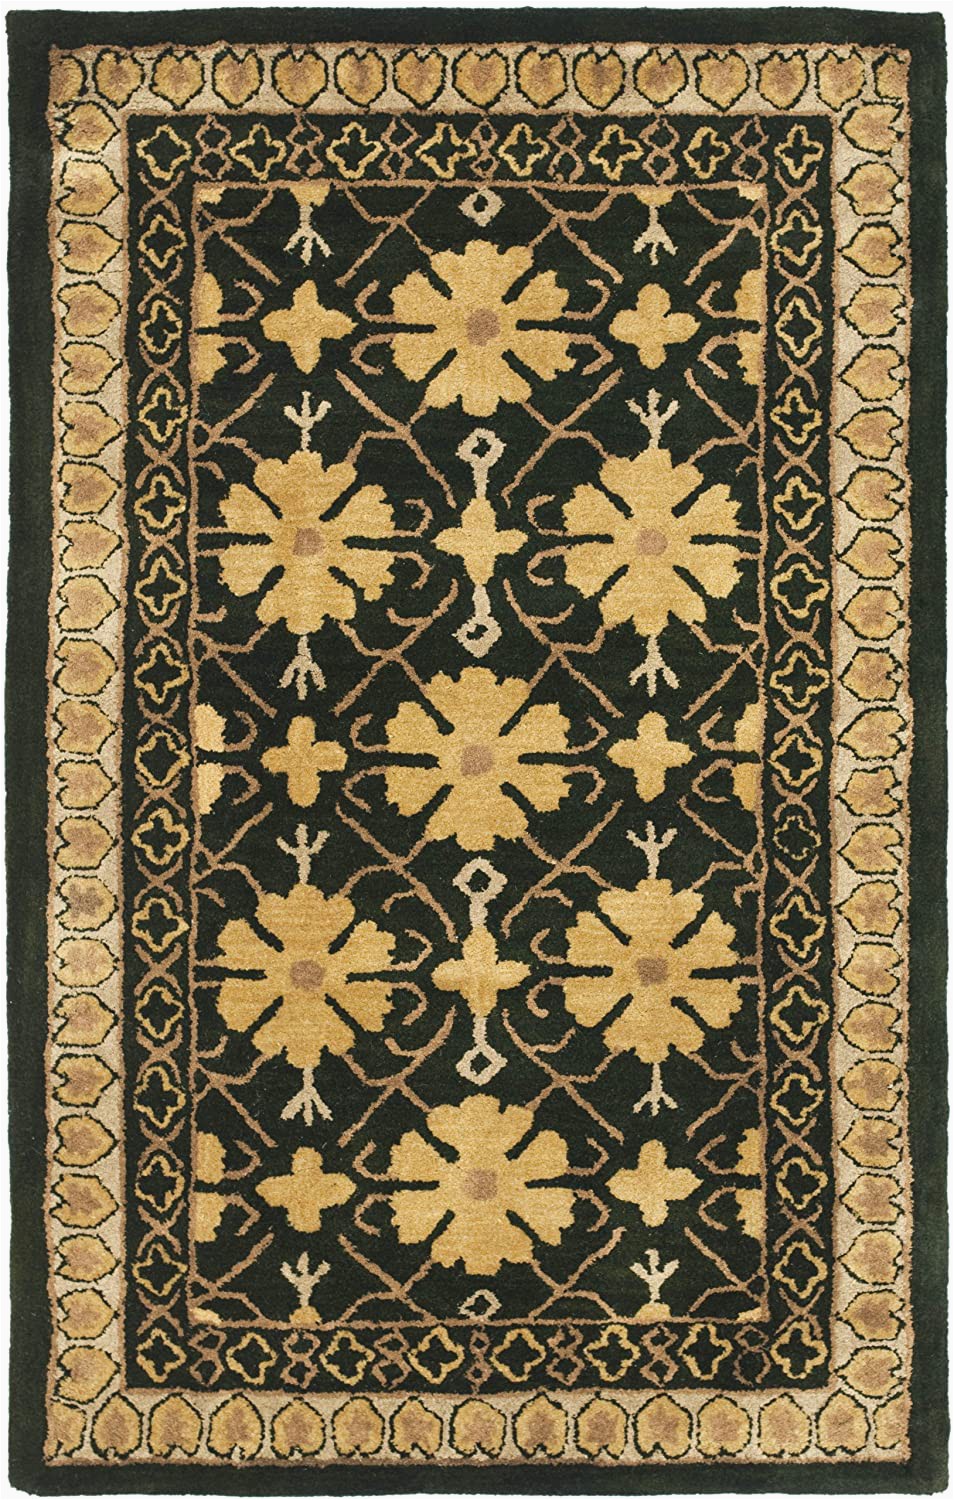 3 X 5 Green area Rugs Buy 3 X 5 Green Apricot Safavieh Classic Collection